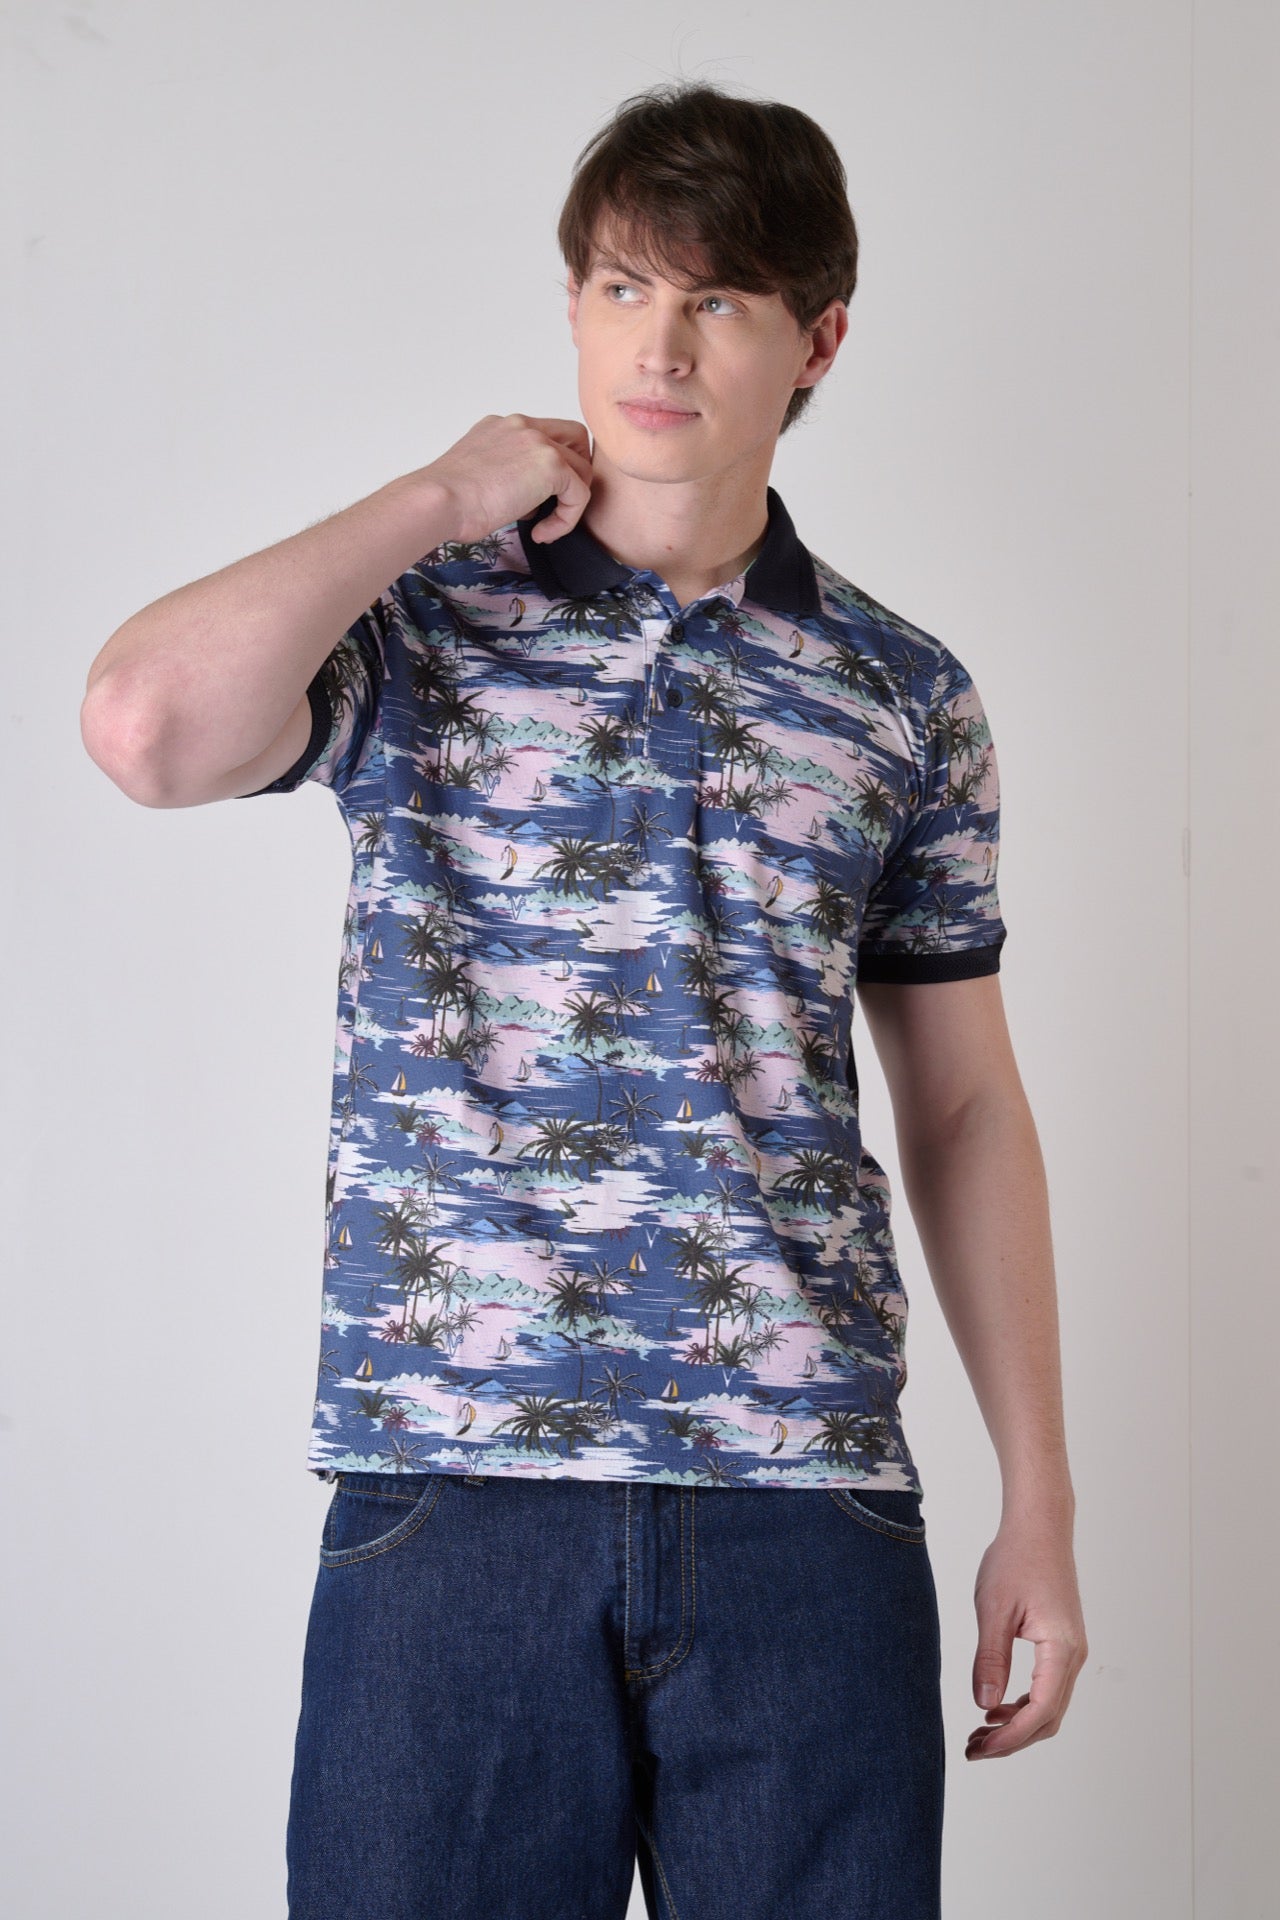 All-over printed polo shirts with Hawaiian pattern